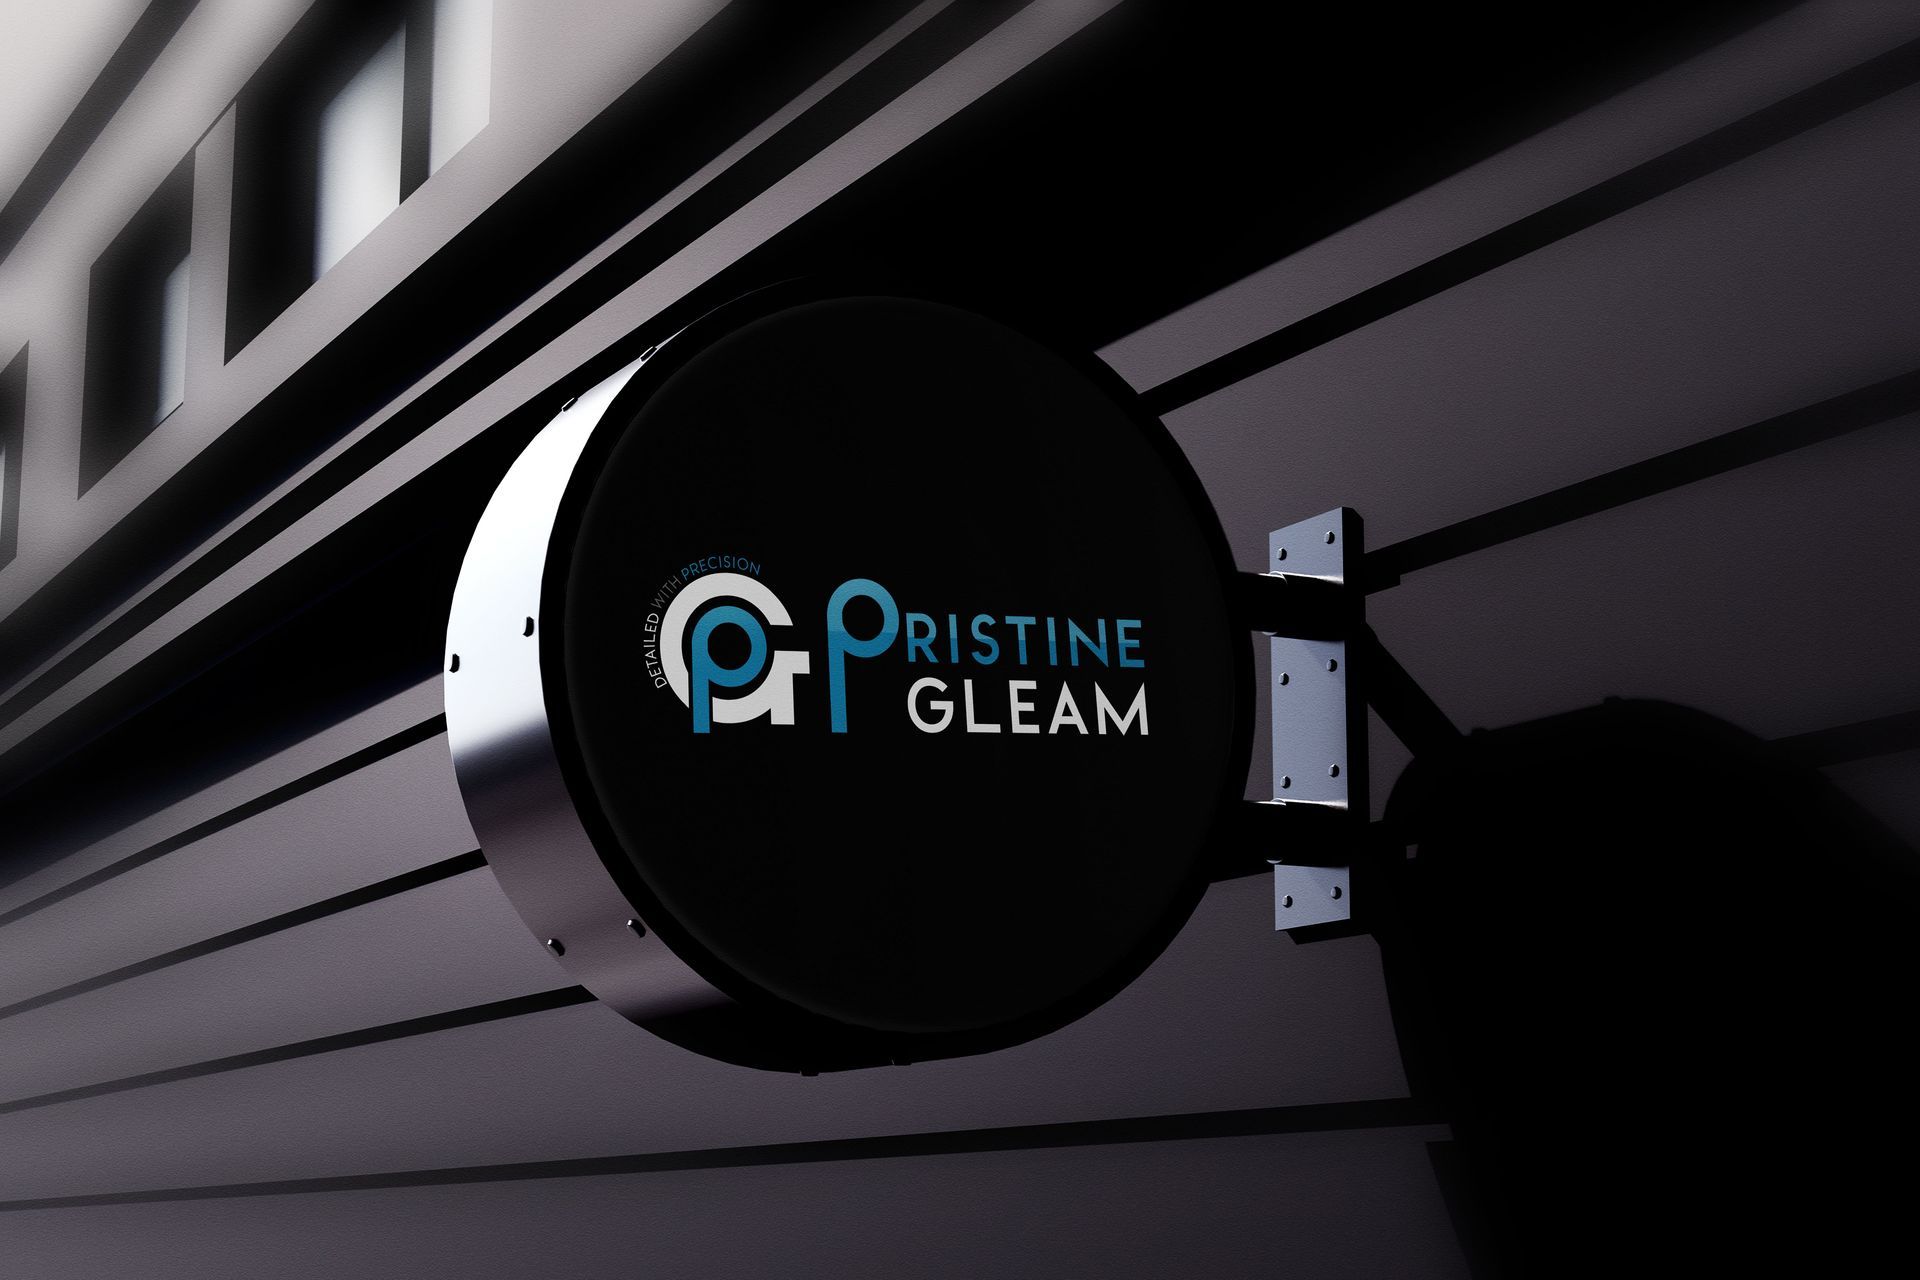 A sign with Pristine Gleam logo on it